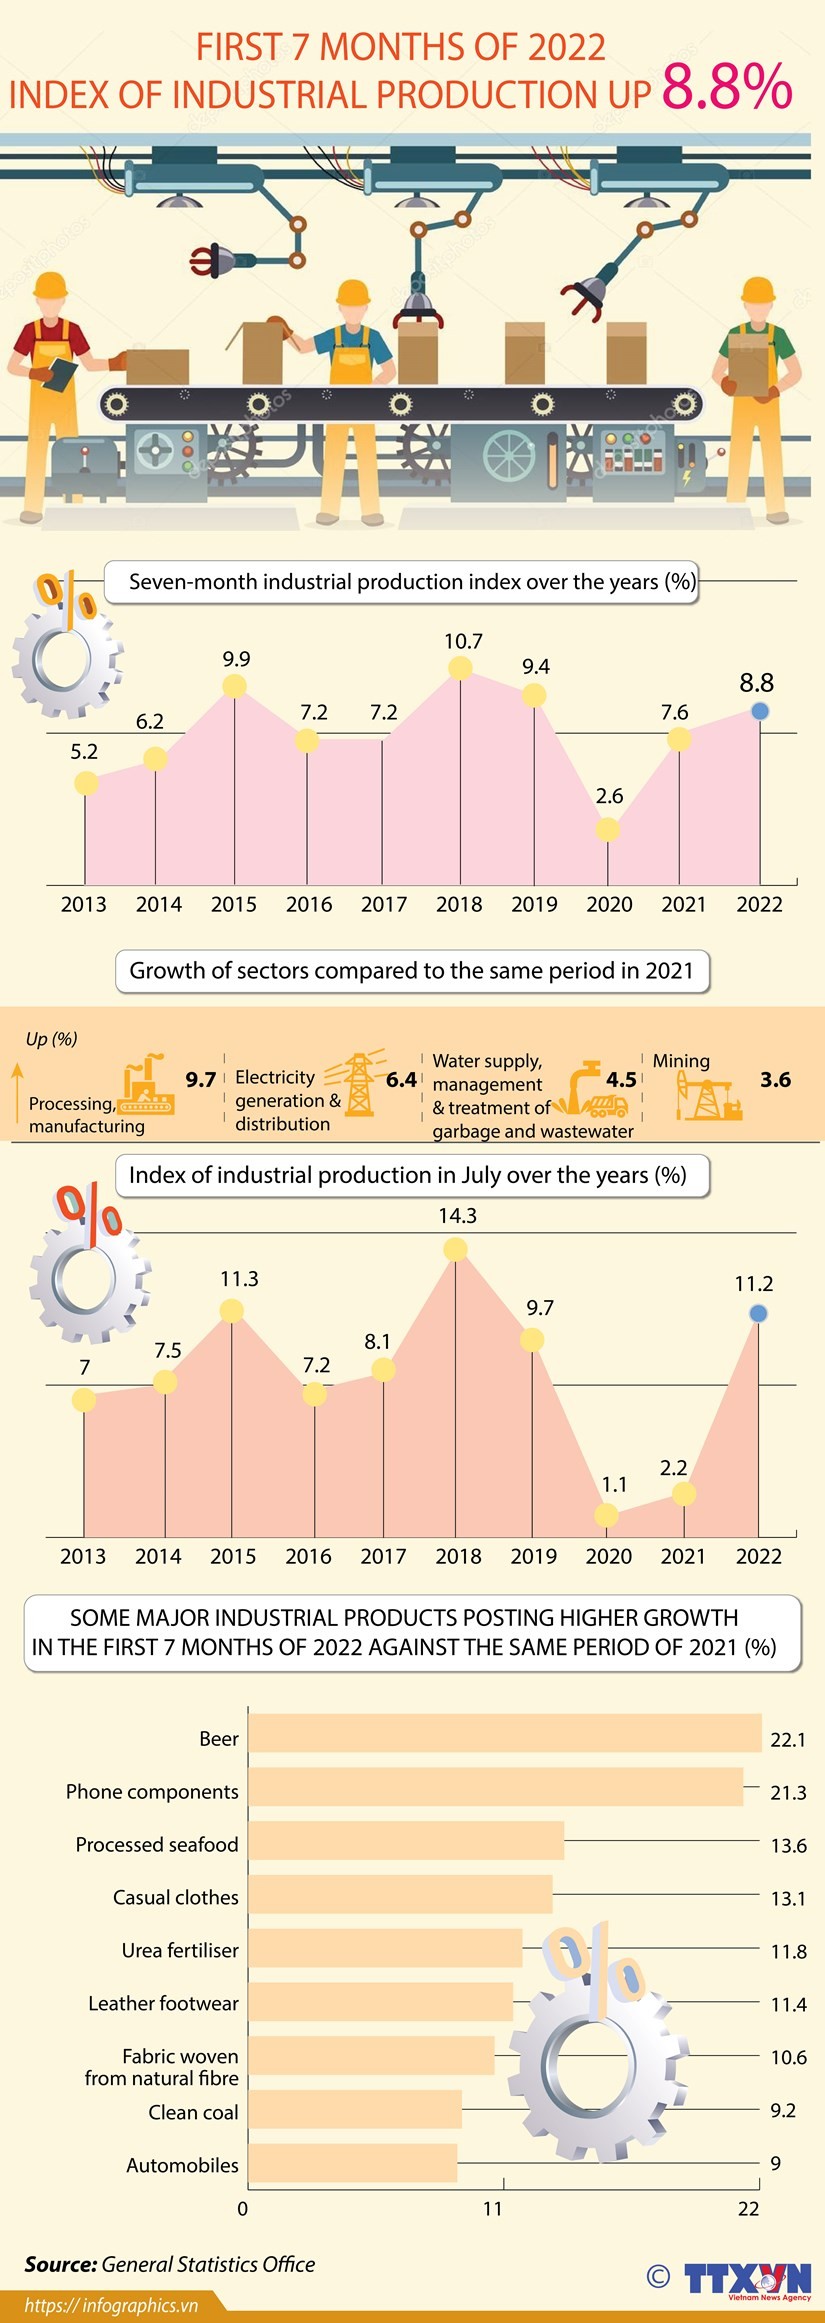 Industrial production index up 8.8% in first 7 months of 2022